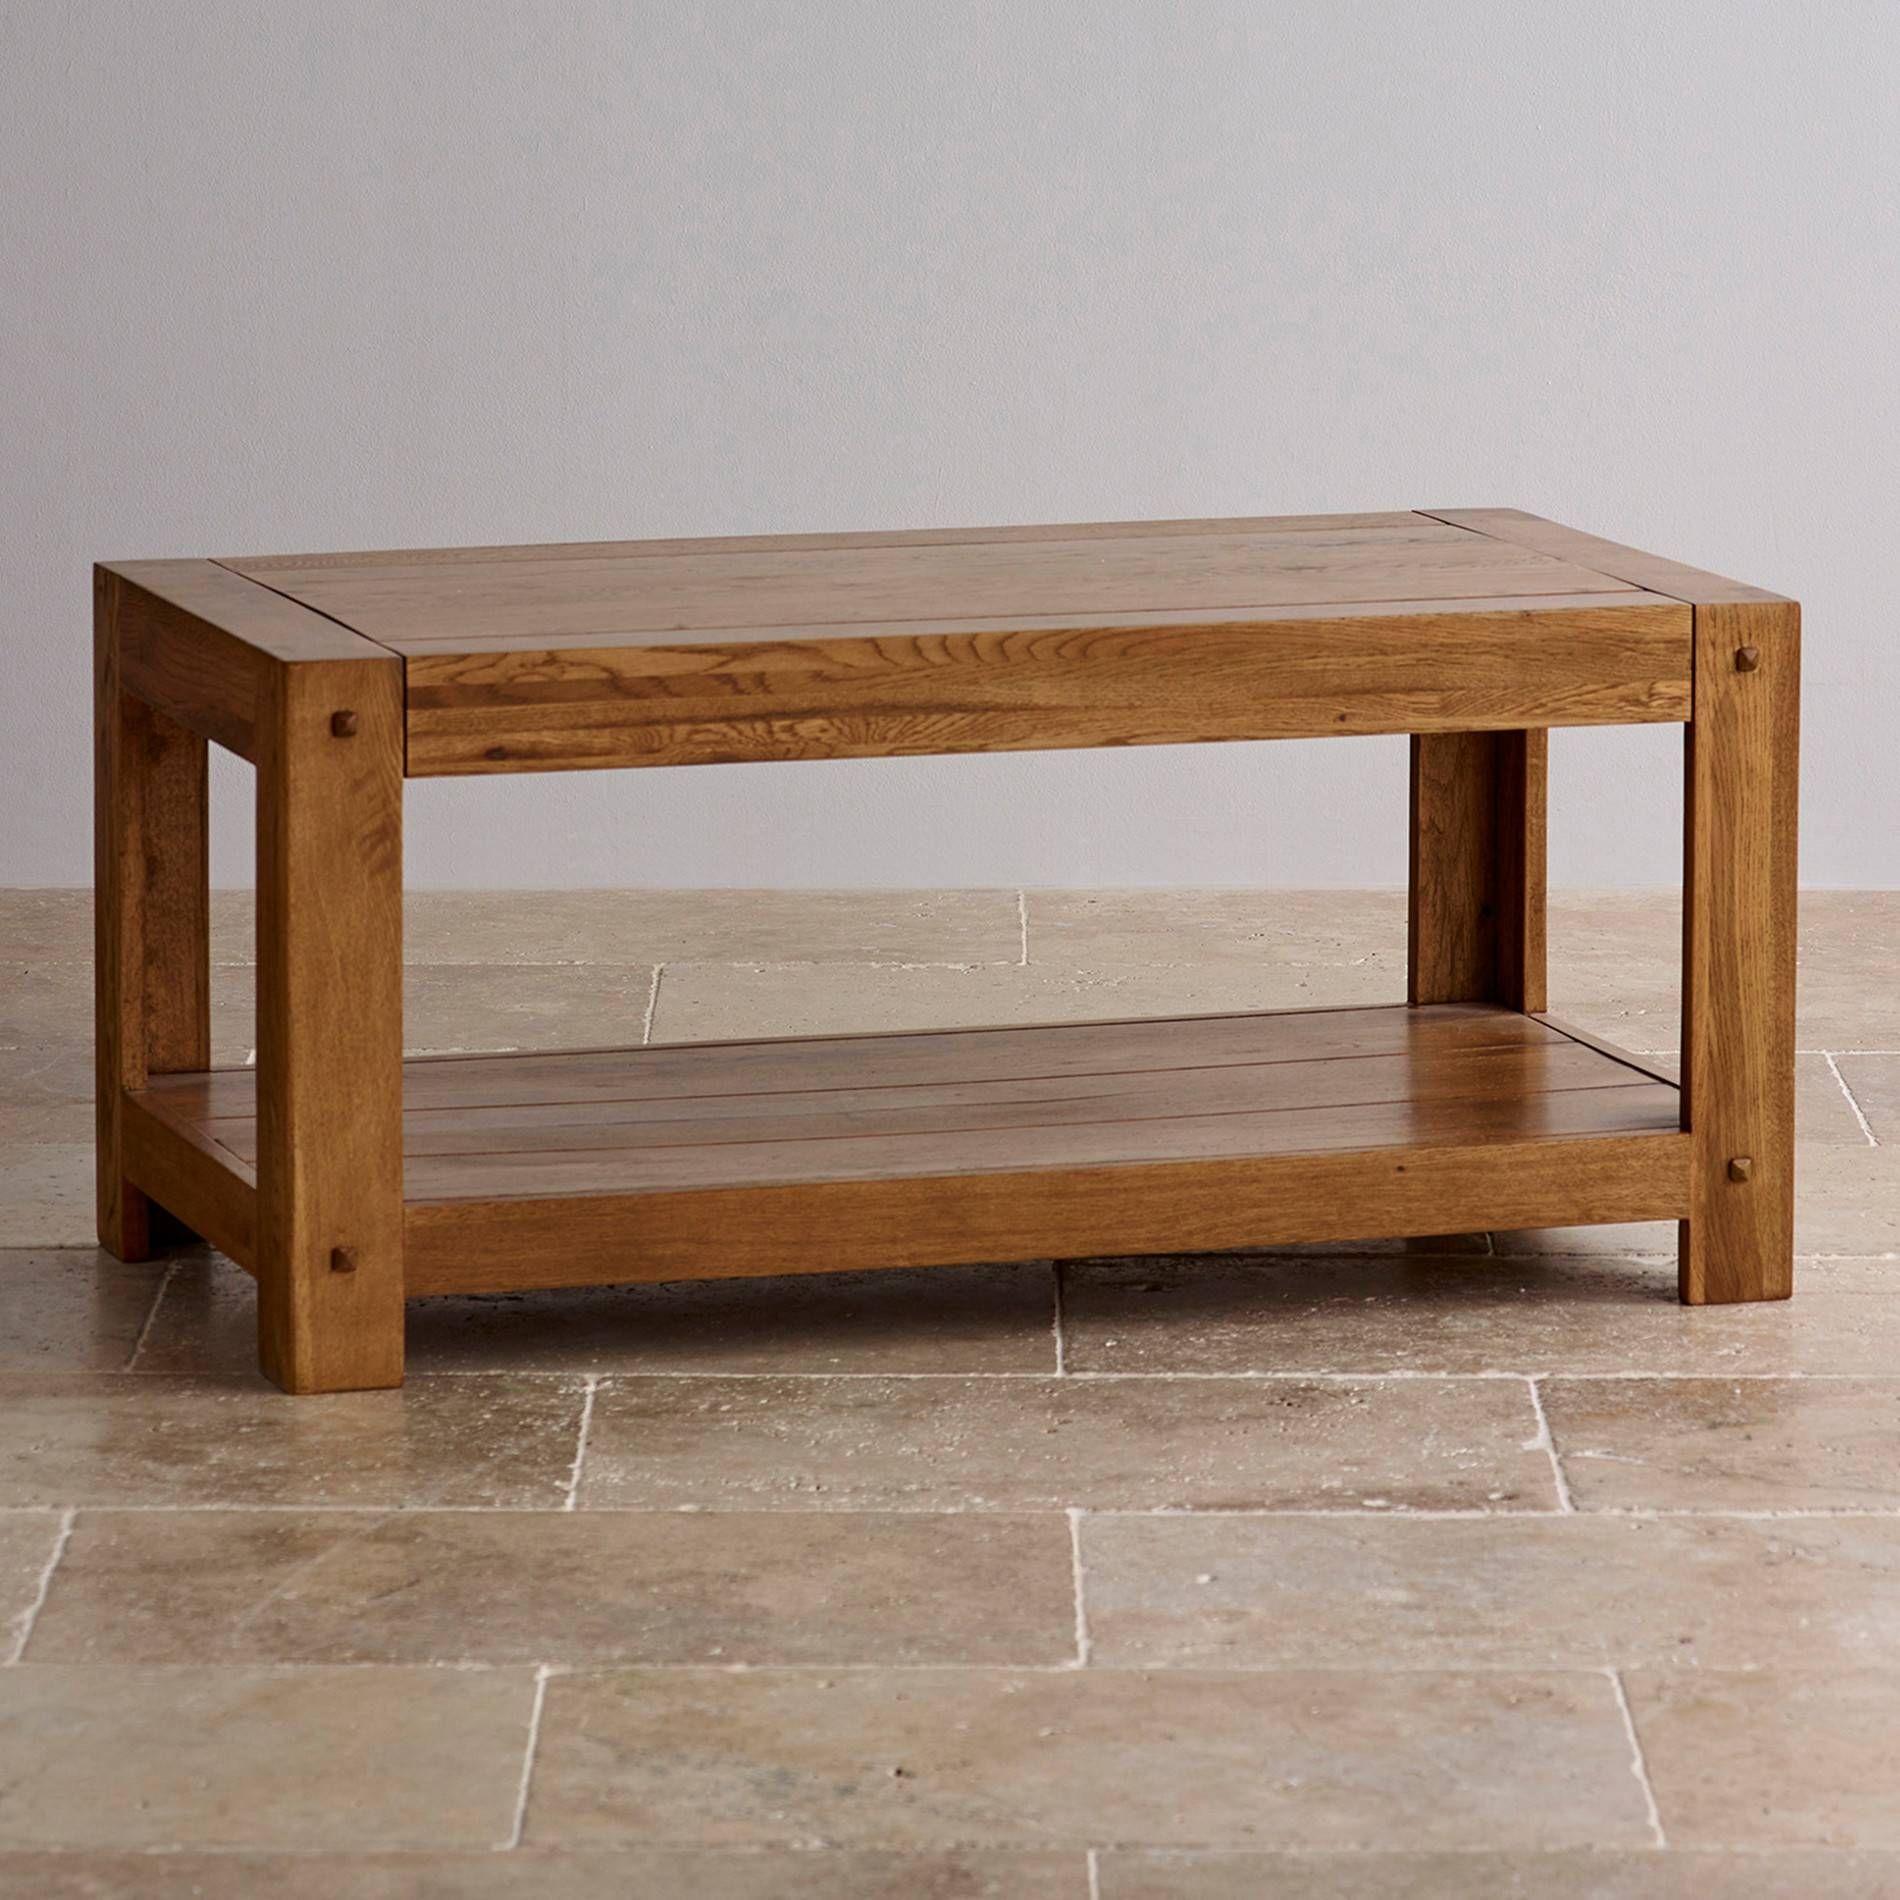 Quercus Coffee Table In Rustic Solid Oak | Oak Furniture Land Intended For Rustic Oak Coffee Tables (View 5 of 15)